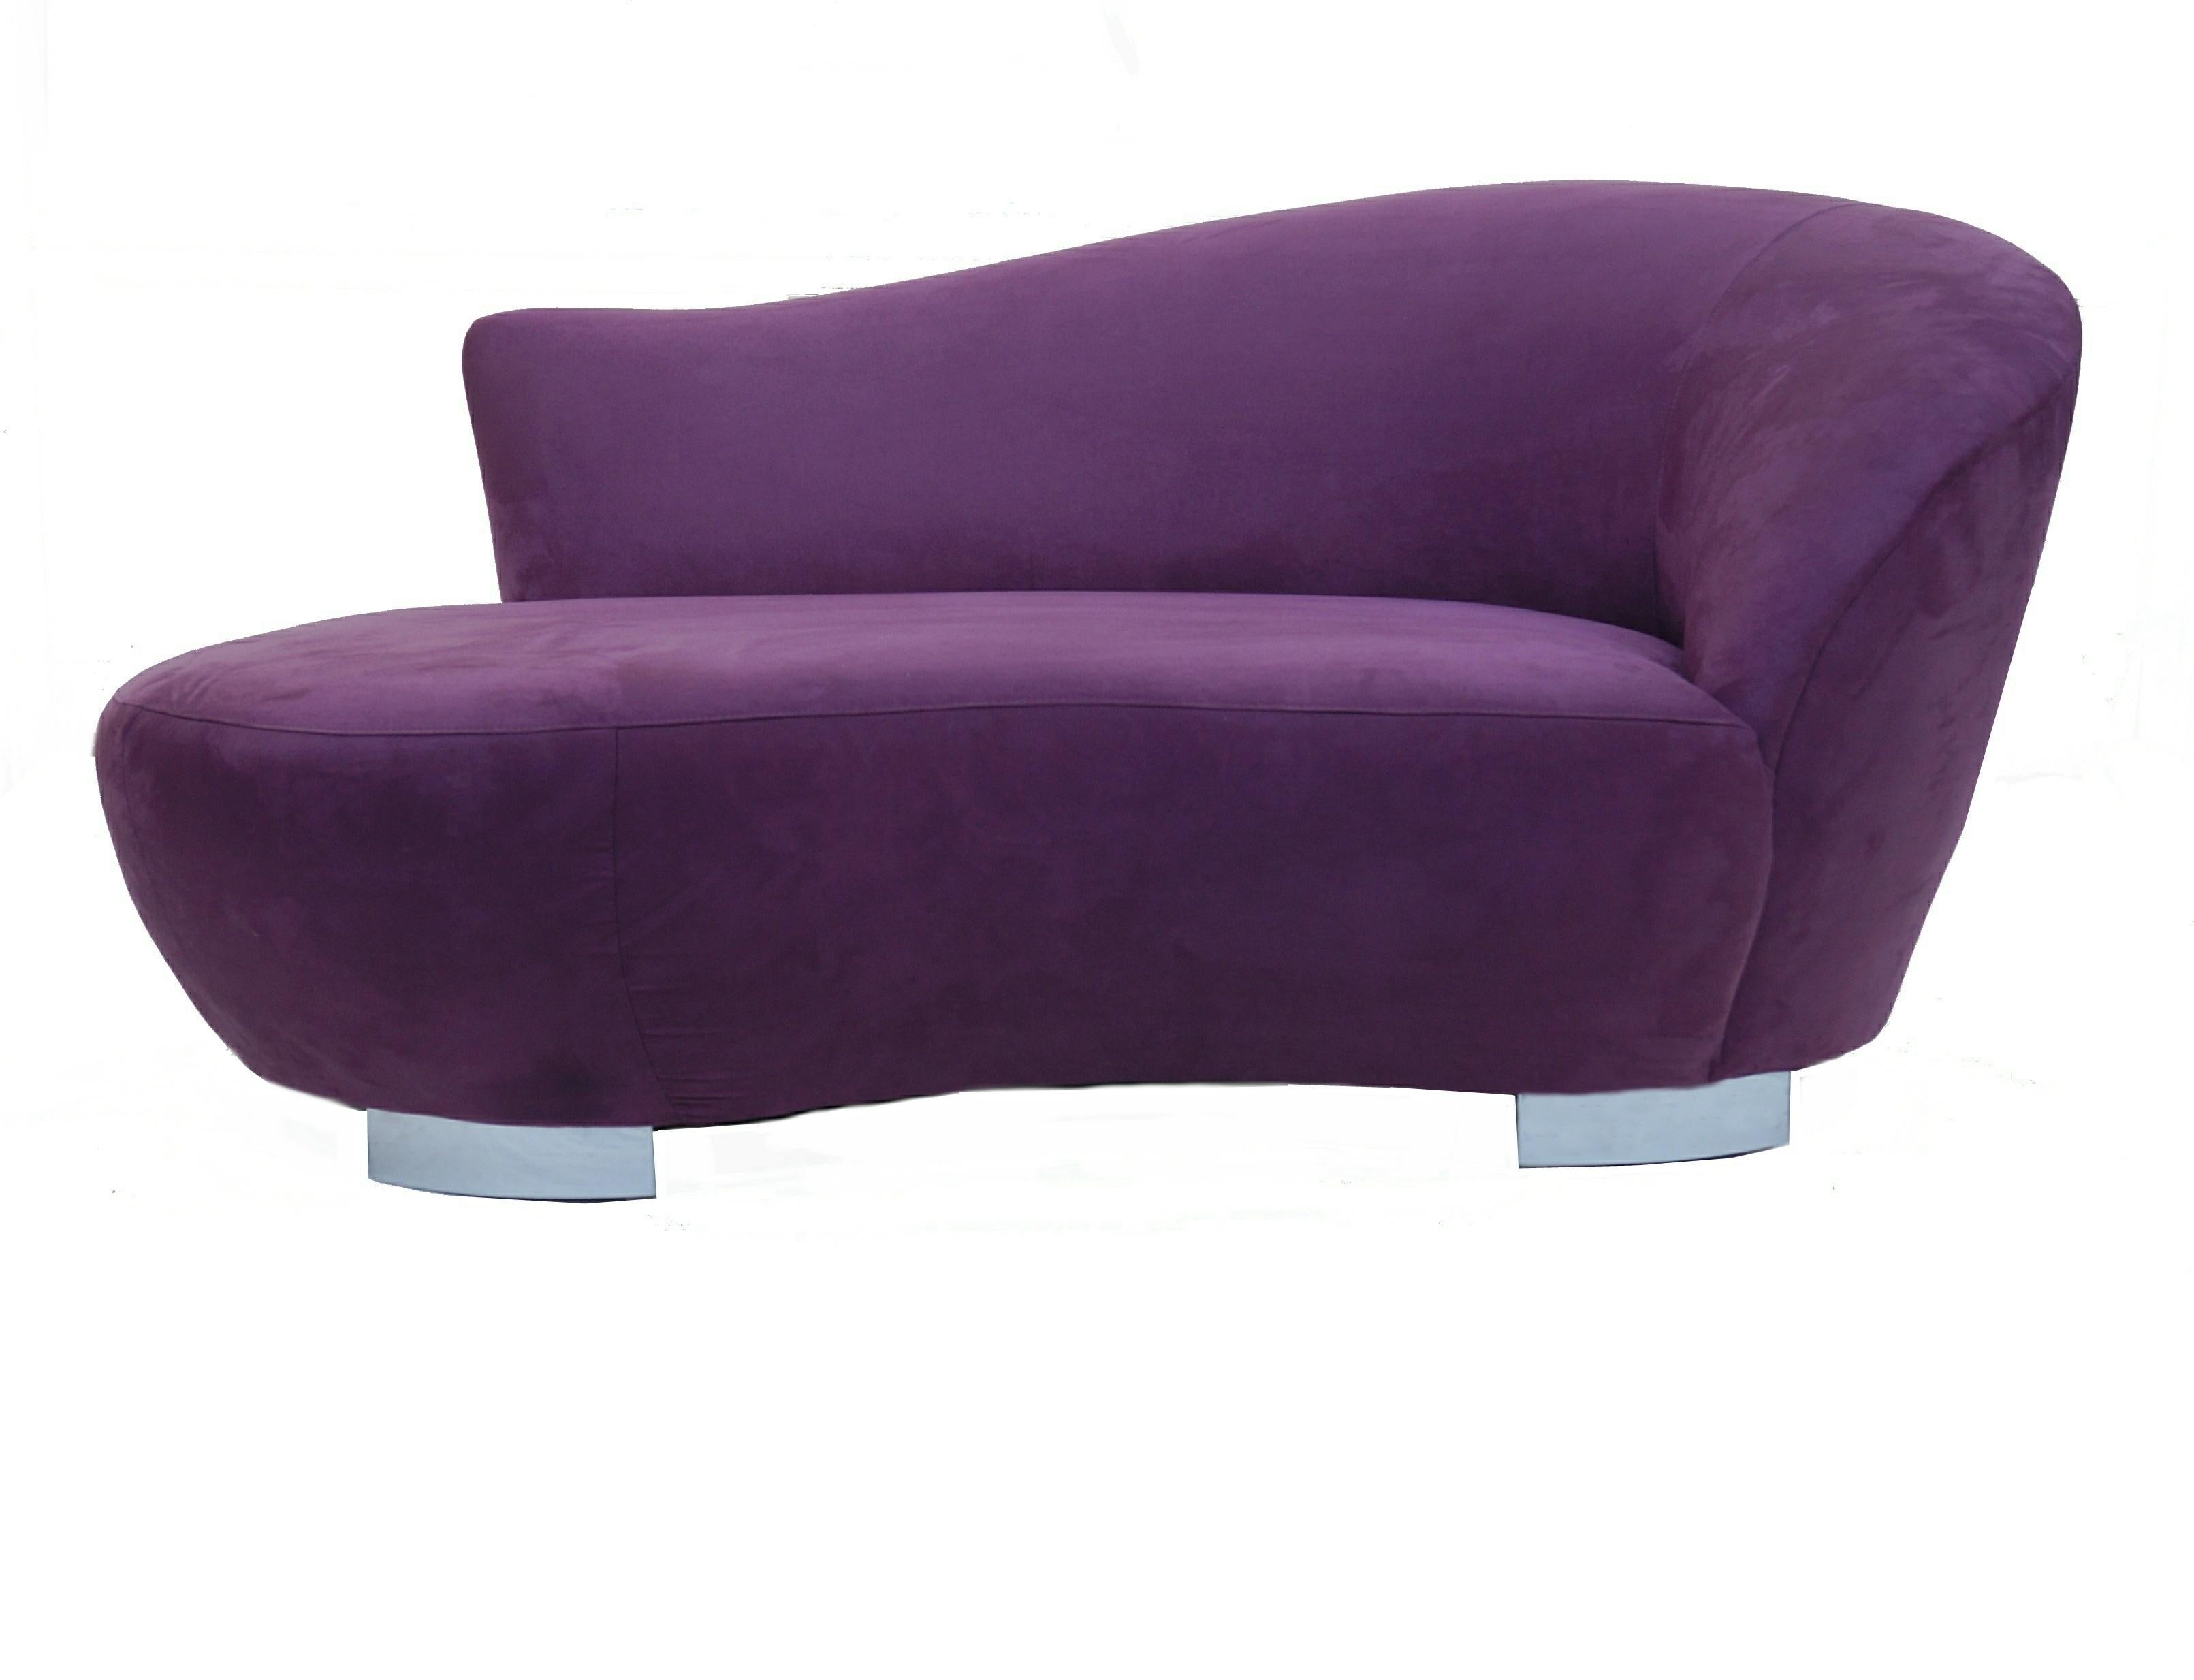 Petite sofa chaise lounge by Vladimir Kagan. Please see our other items for matching full size sofa.